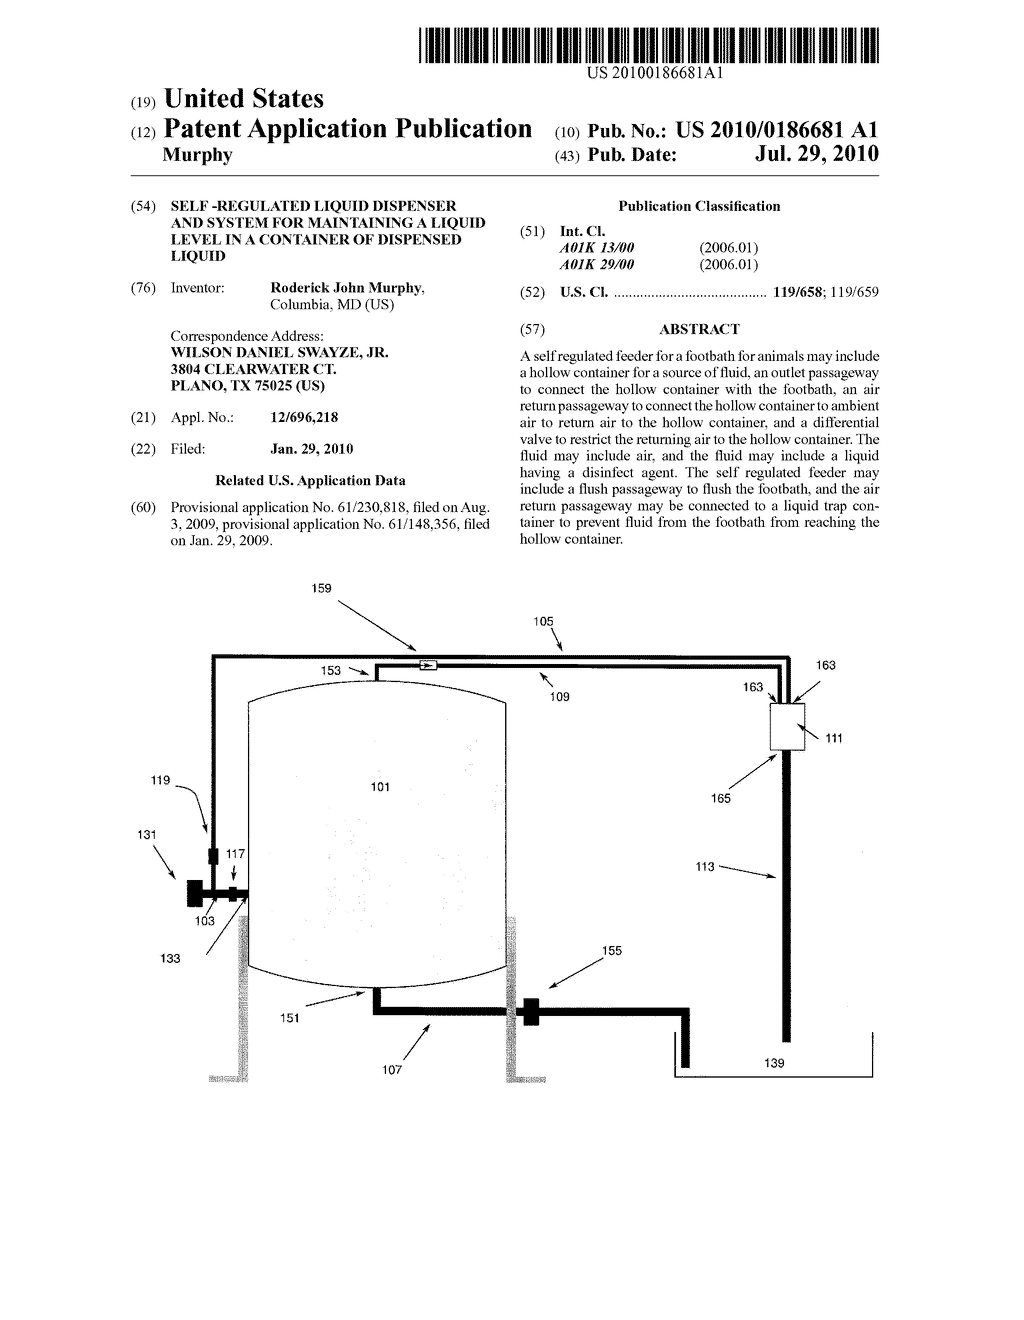 Self -regulated liquid dispenser and system for maintaining a liquid level in a container of dispensed liquid - diagram, schematic, and image 01